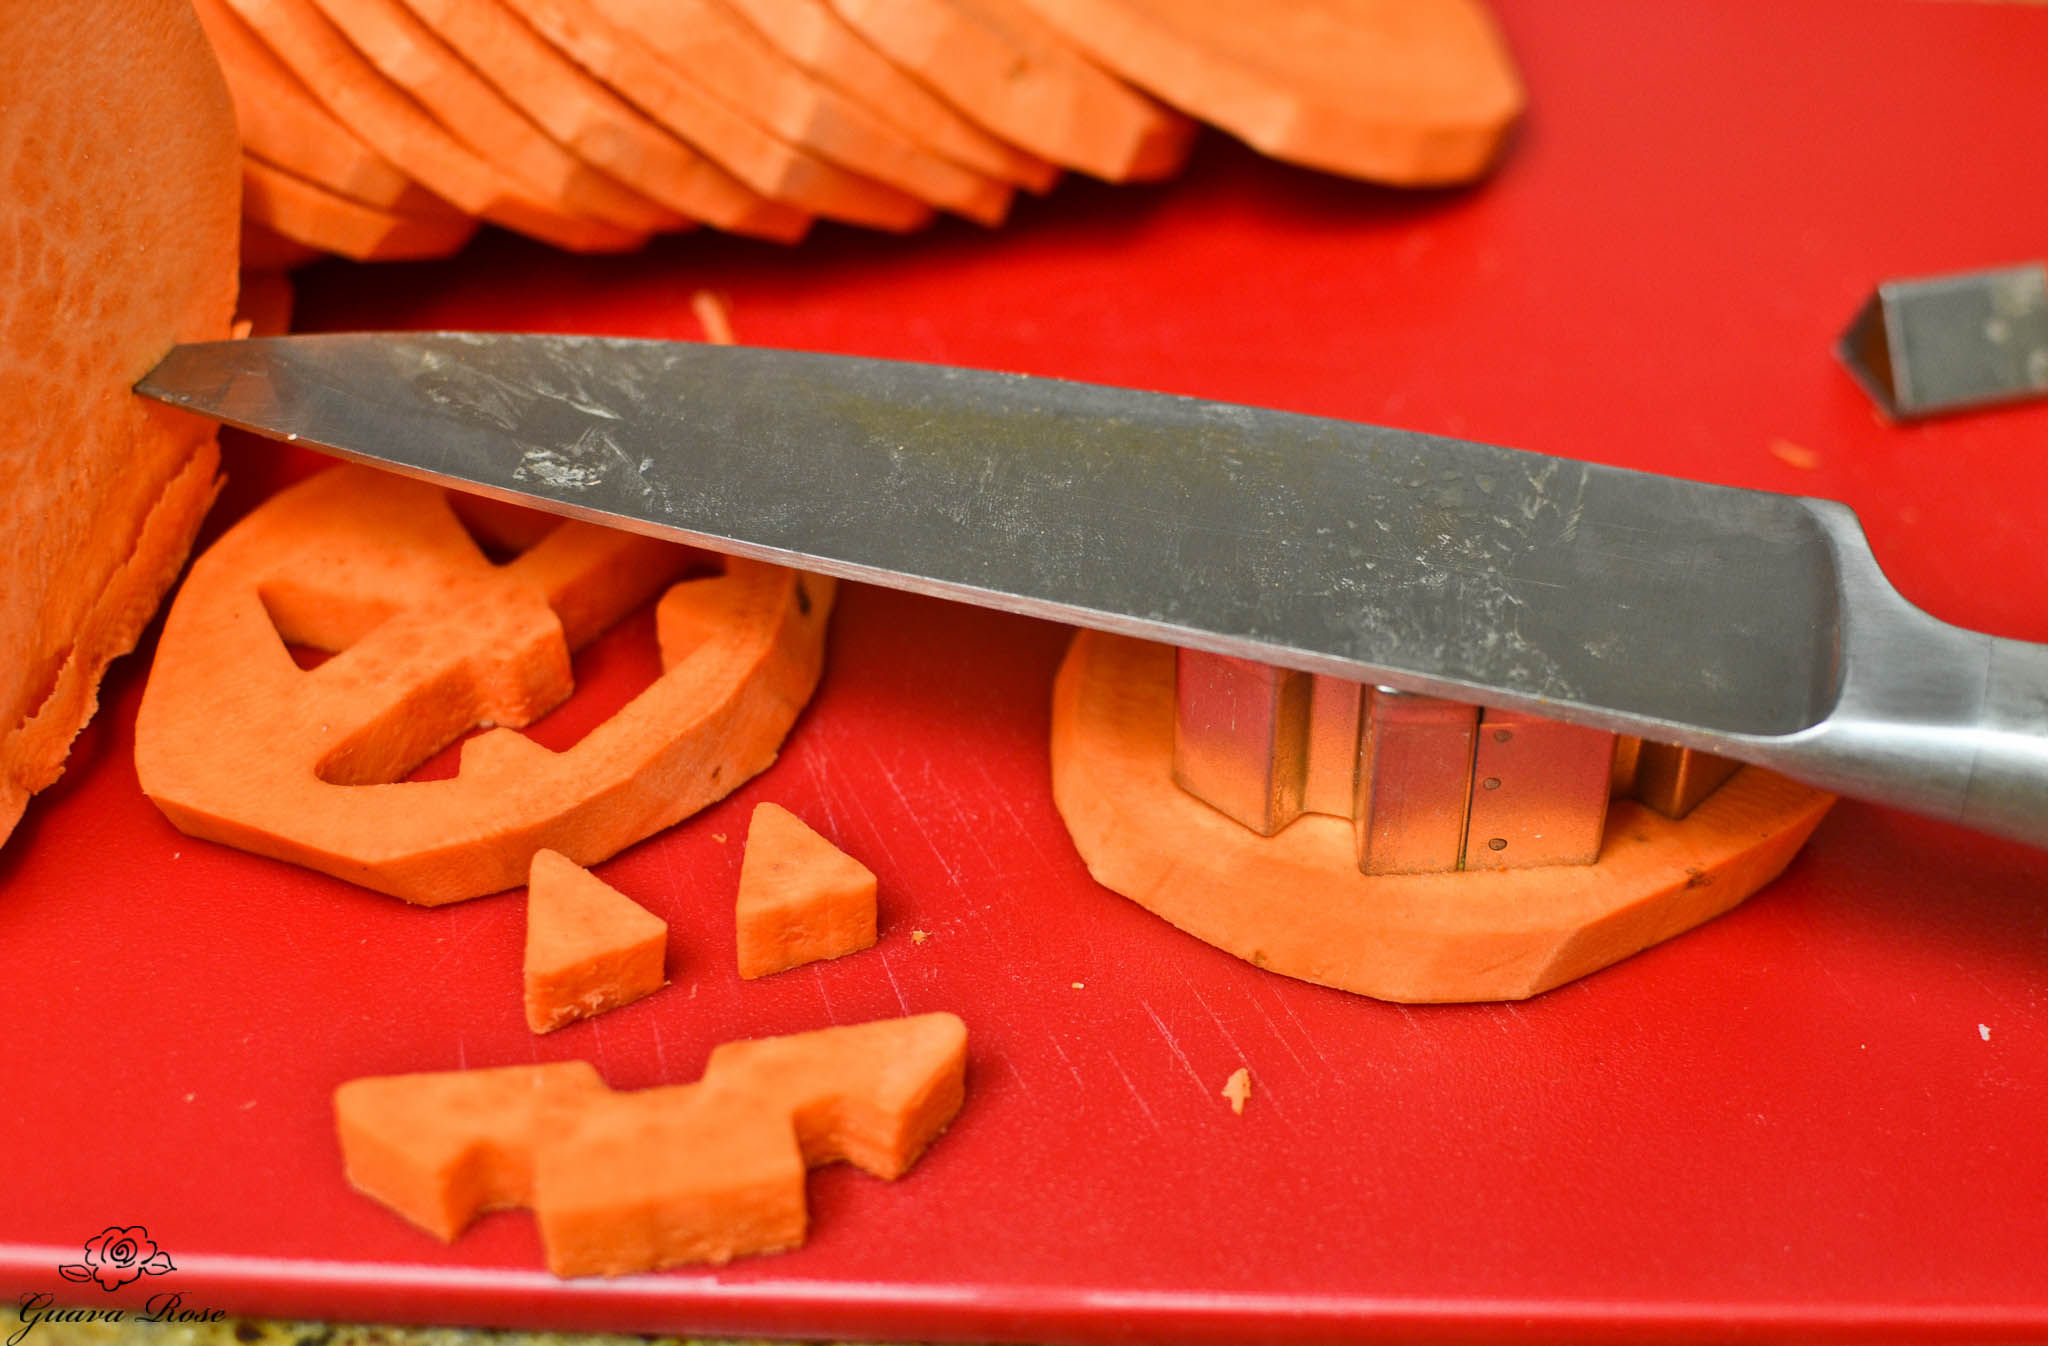 Pressing jack-o-lantern face cutters into sweet potato slices